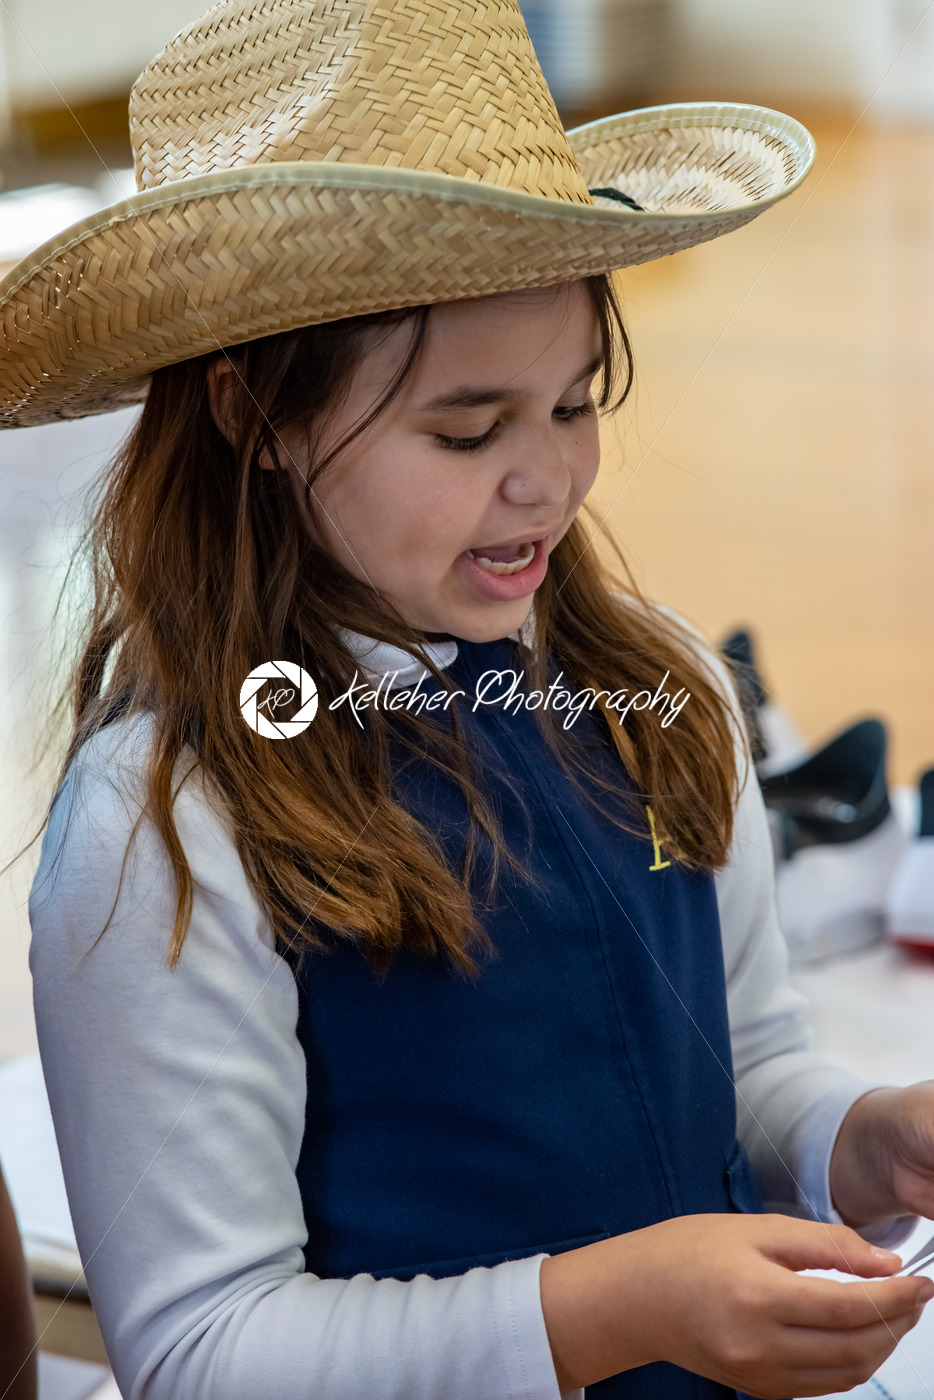 ROSEMONT, PA – MAY 15, 2019: Lower school 4th grade region fair at The Agnes Irwin School - Kelleher Photography Store